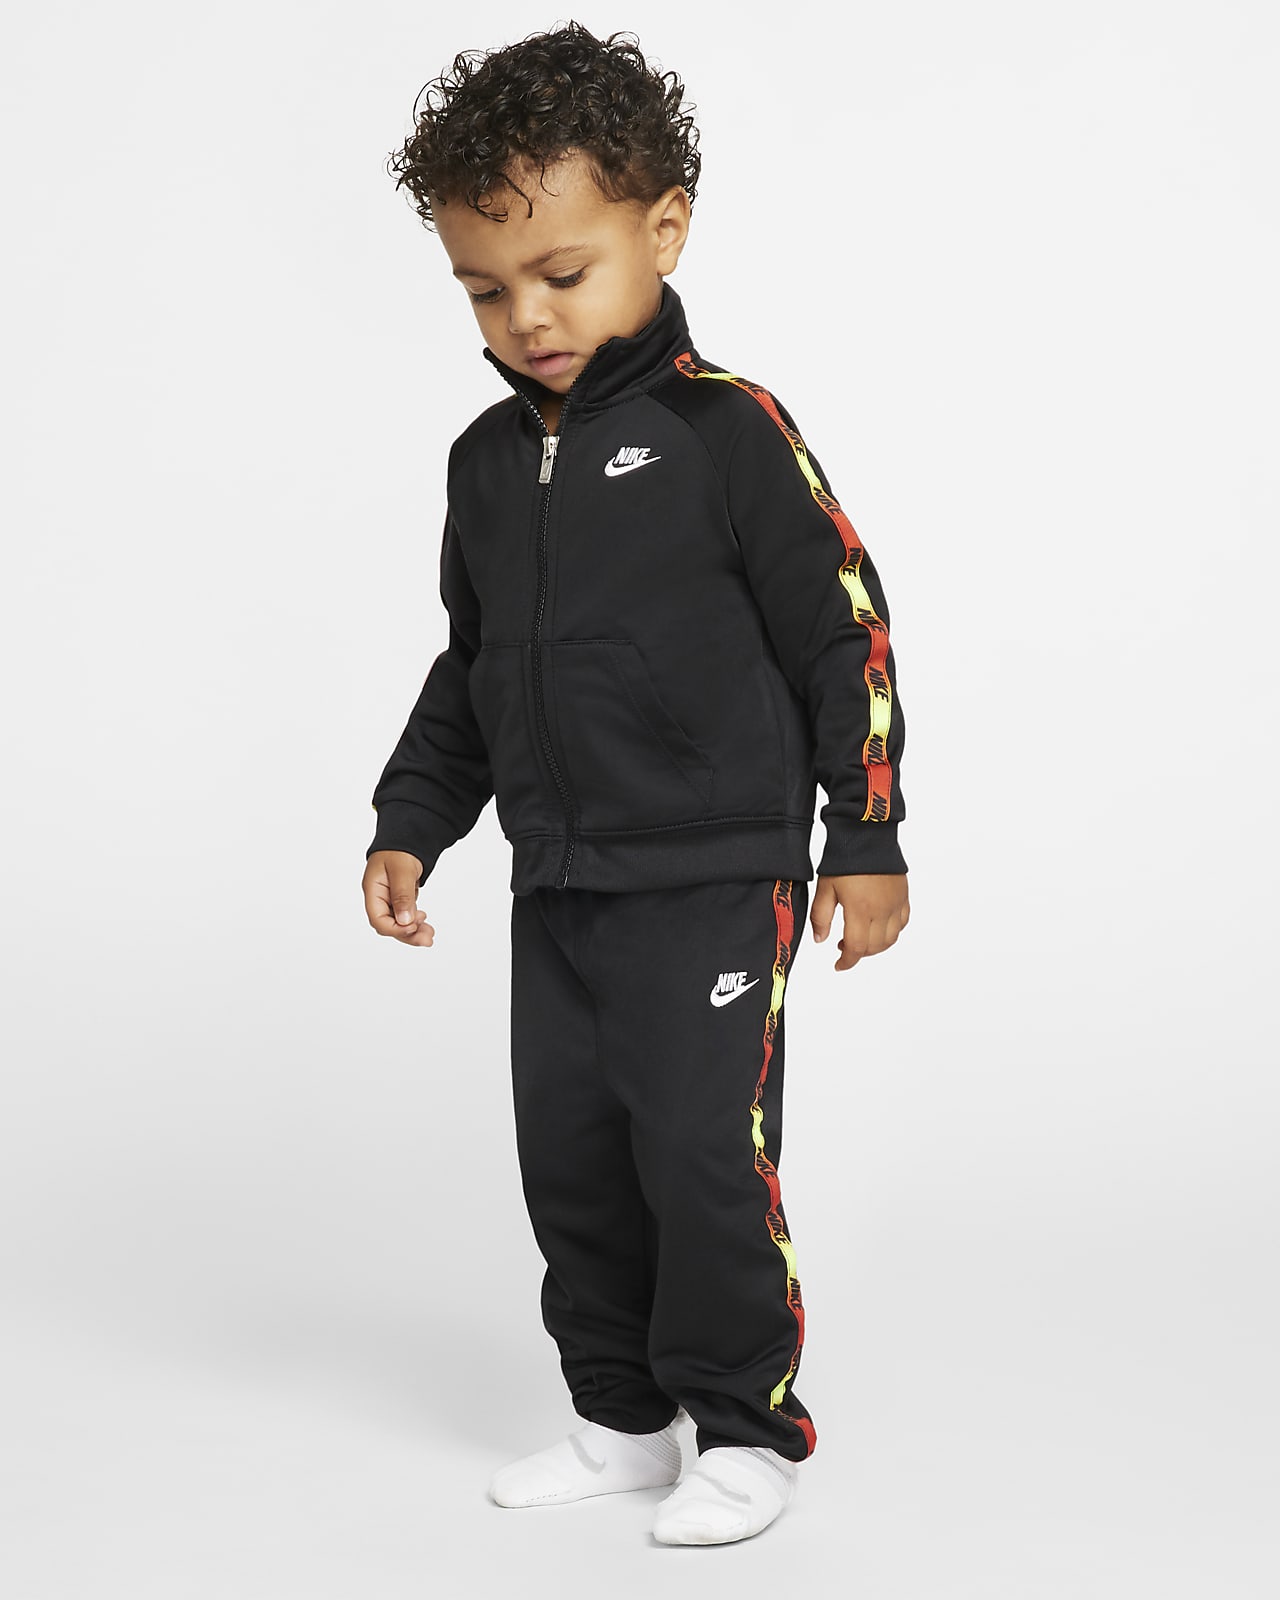 1 year old nike tracksuit